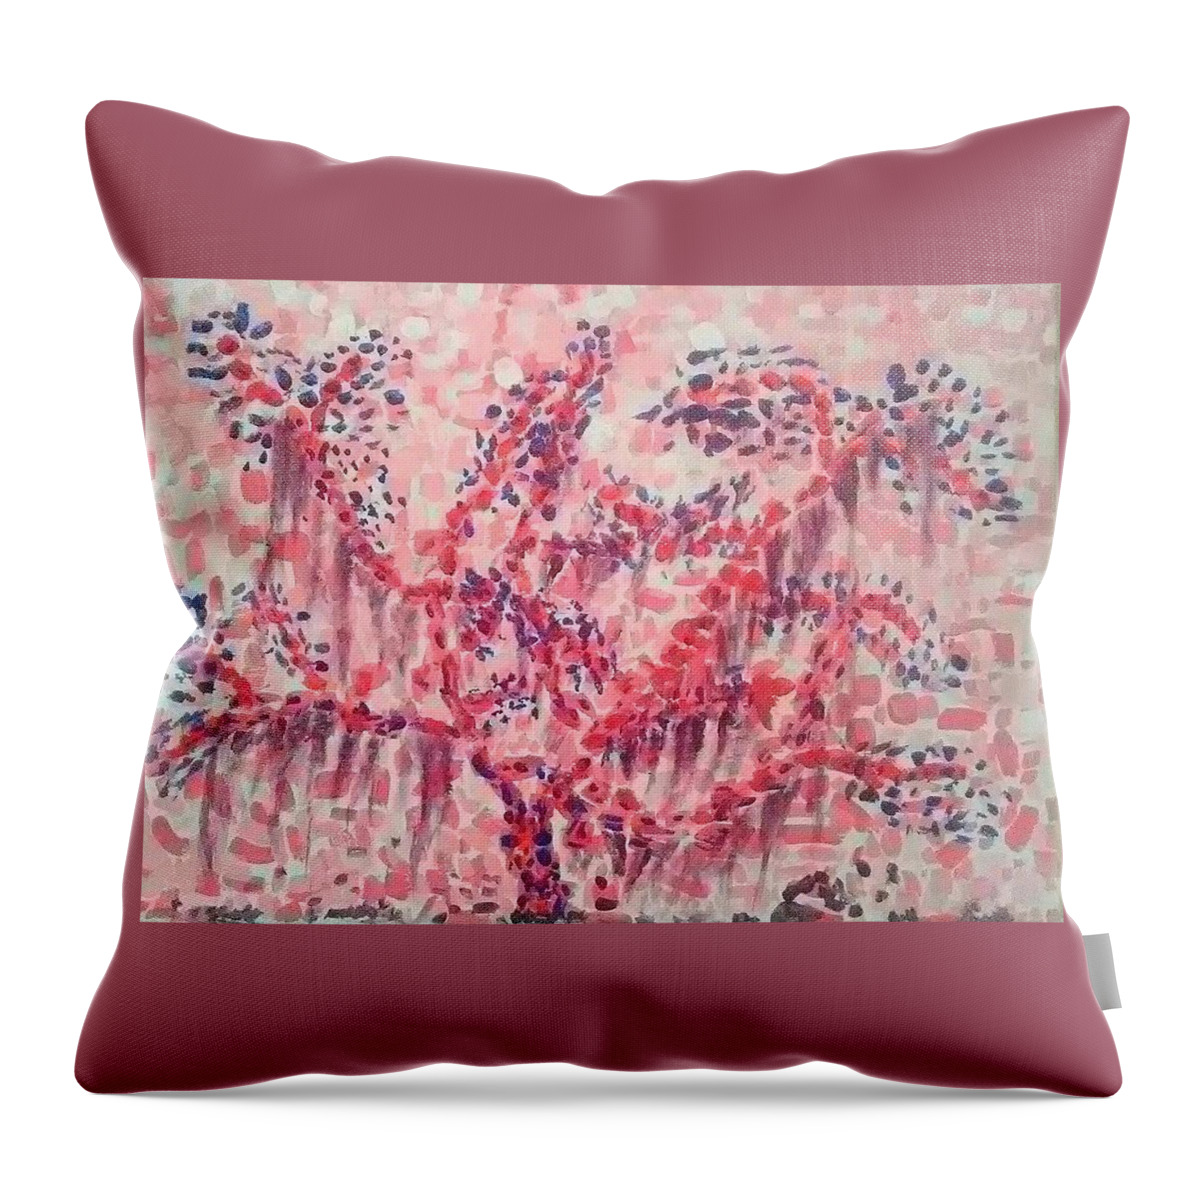 Spanish Moss Throw Pillow featuring the painting Summertime by Suzanne Berthier